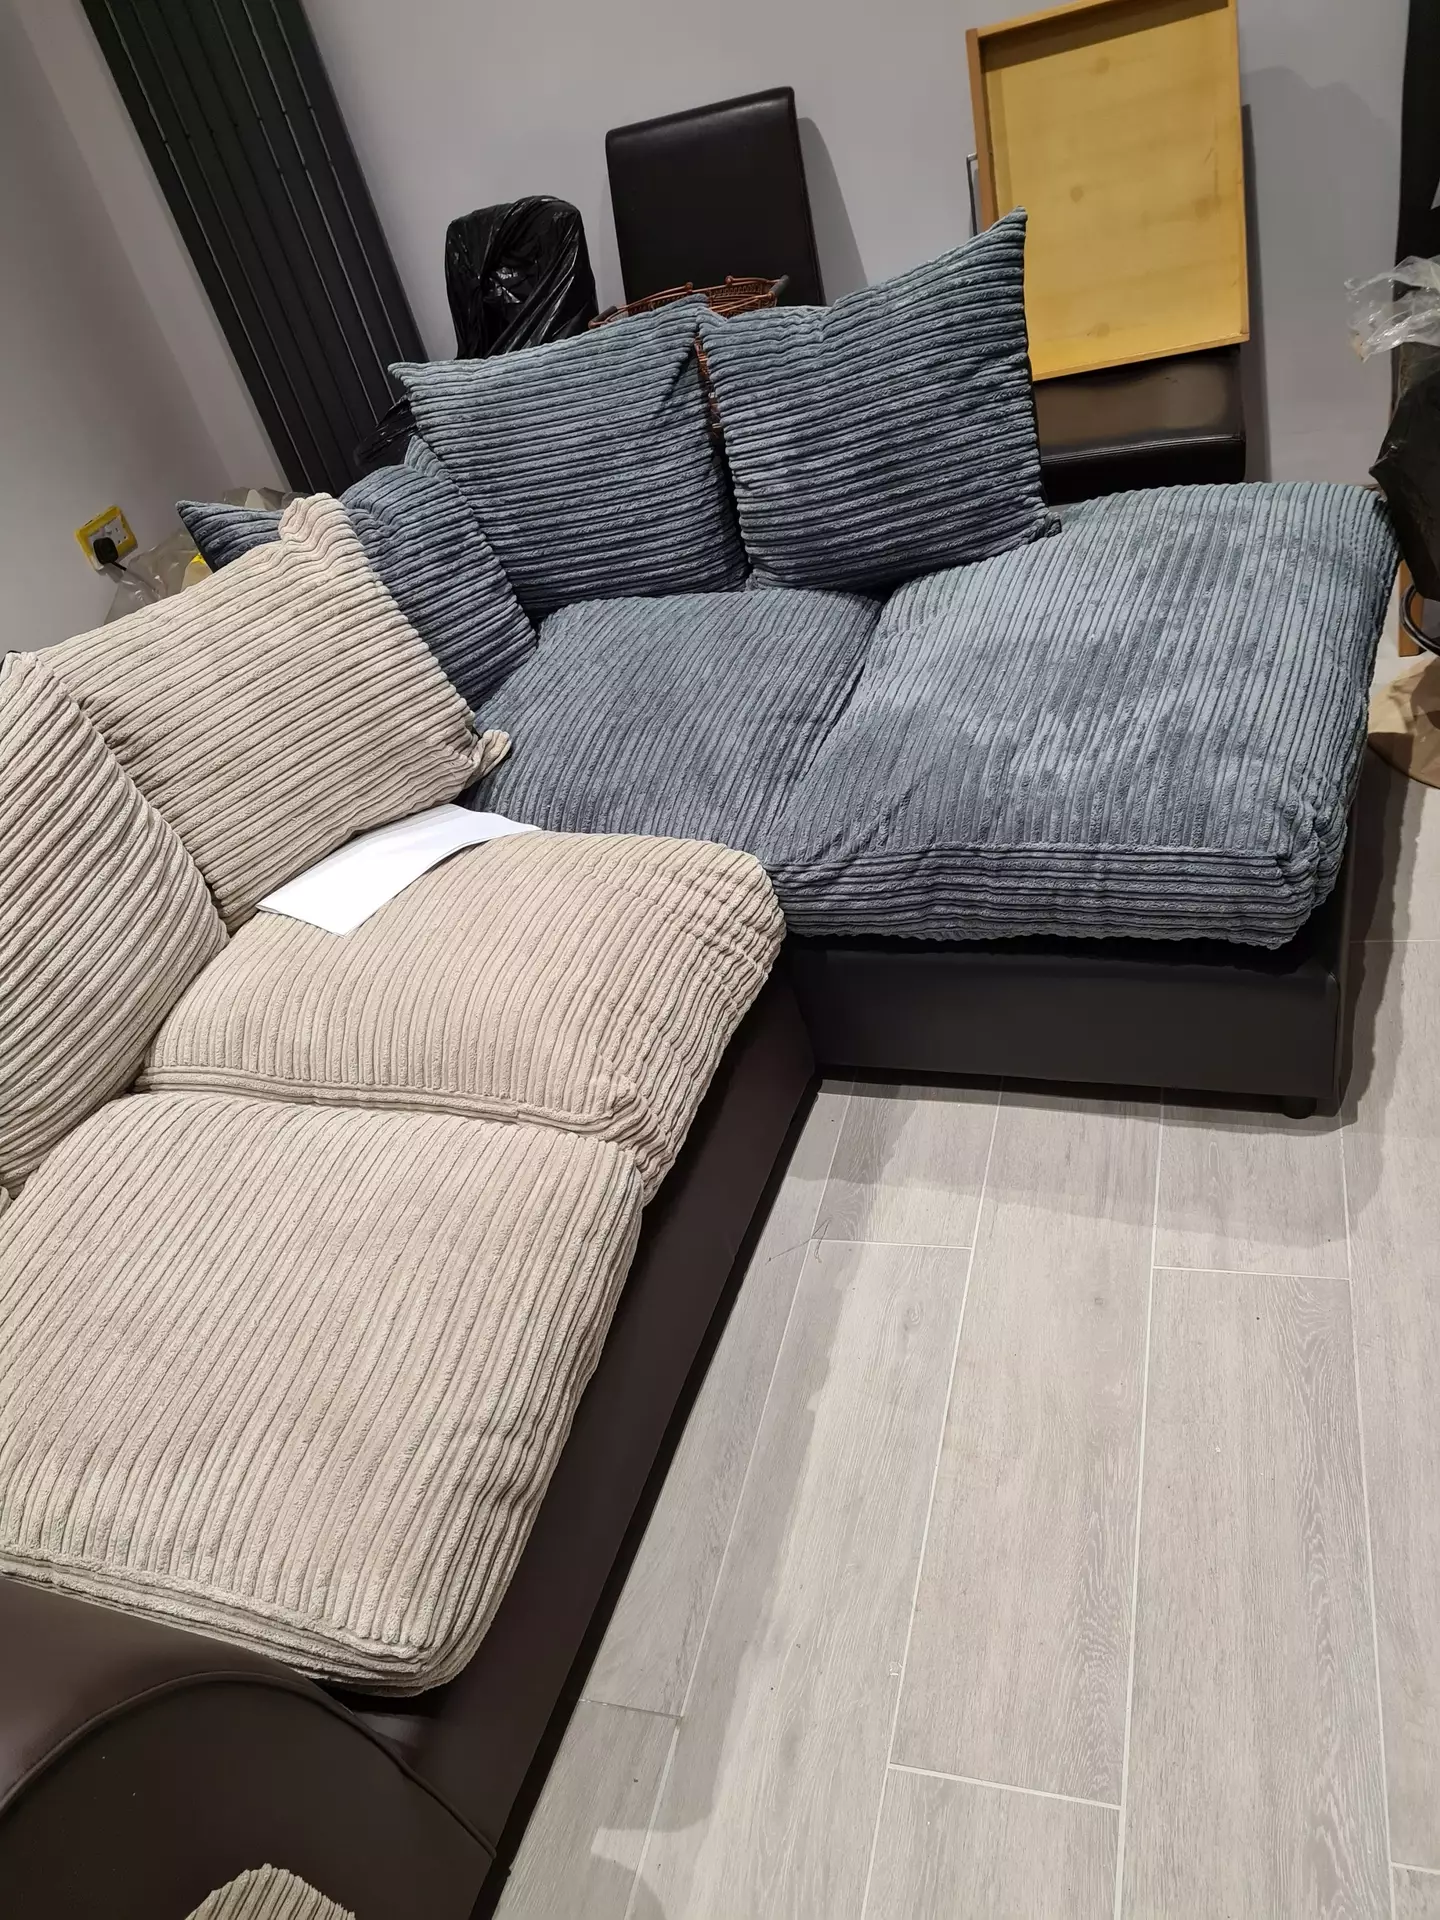 The sofa arrived in two different colours (